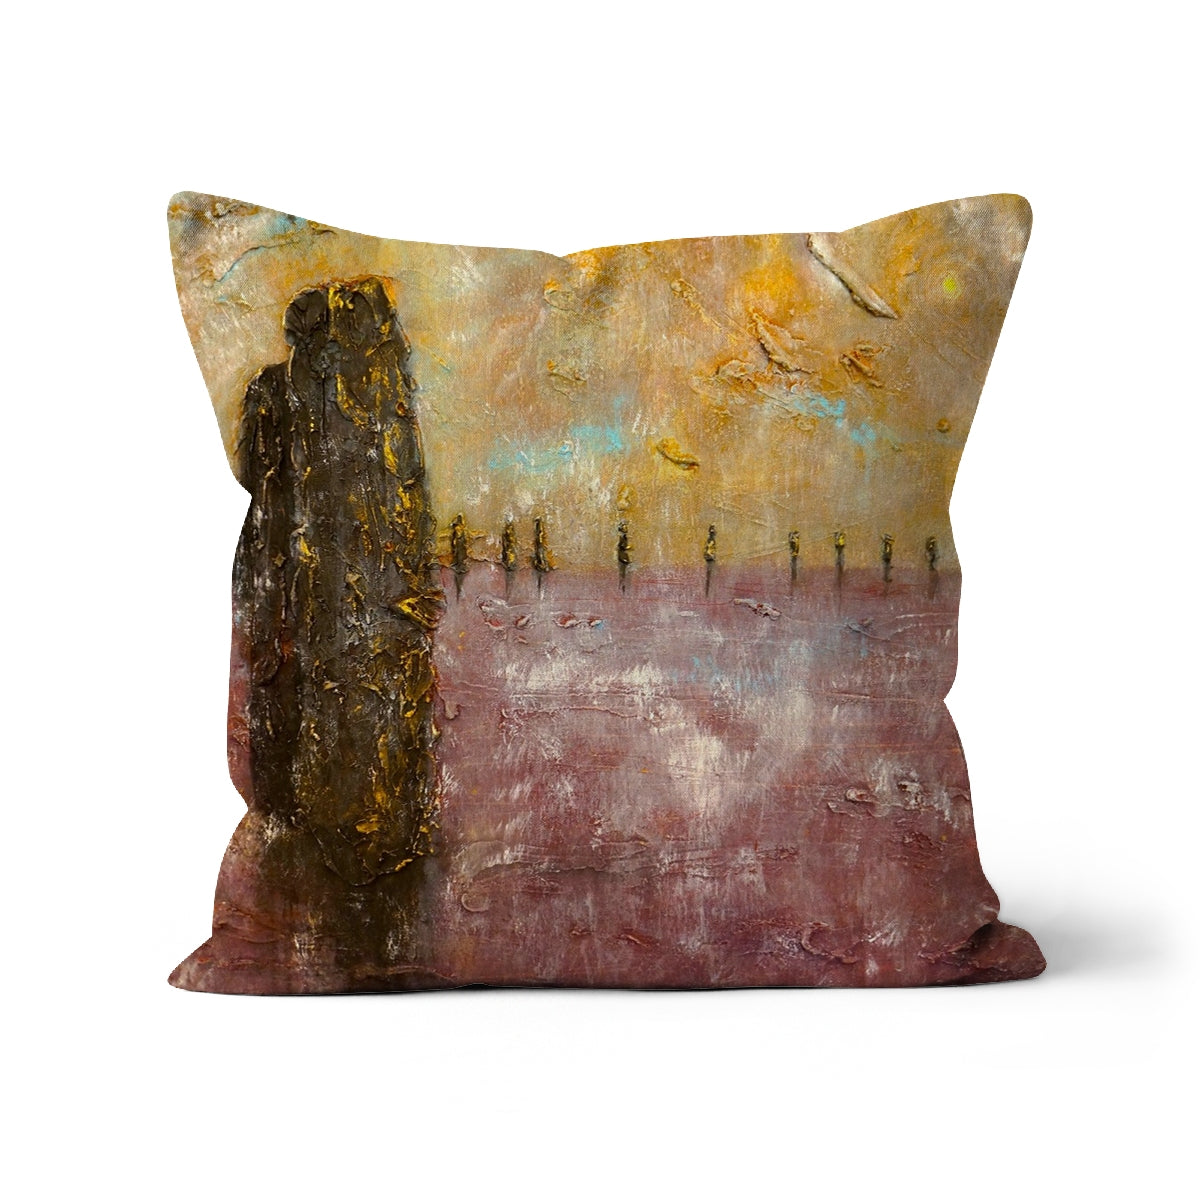 Bordgar Mist Orkney Art Gifts Cushion-Cushions-Orkney Art Gallery-Canvas-12"x12"-Paintings, Prints, Homeware, Art Gifts From Scotland By Scottish Artist Kevin Hunter